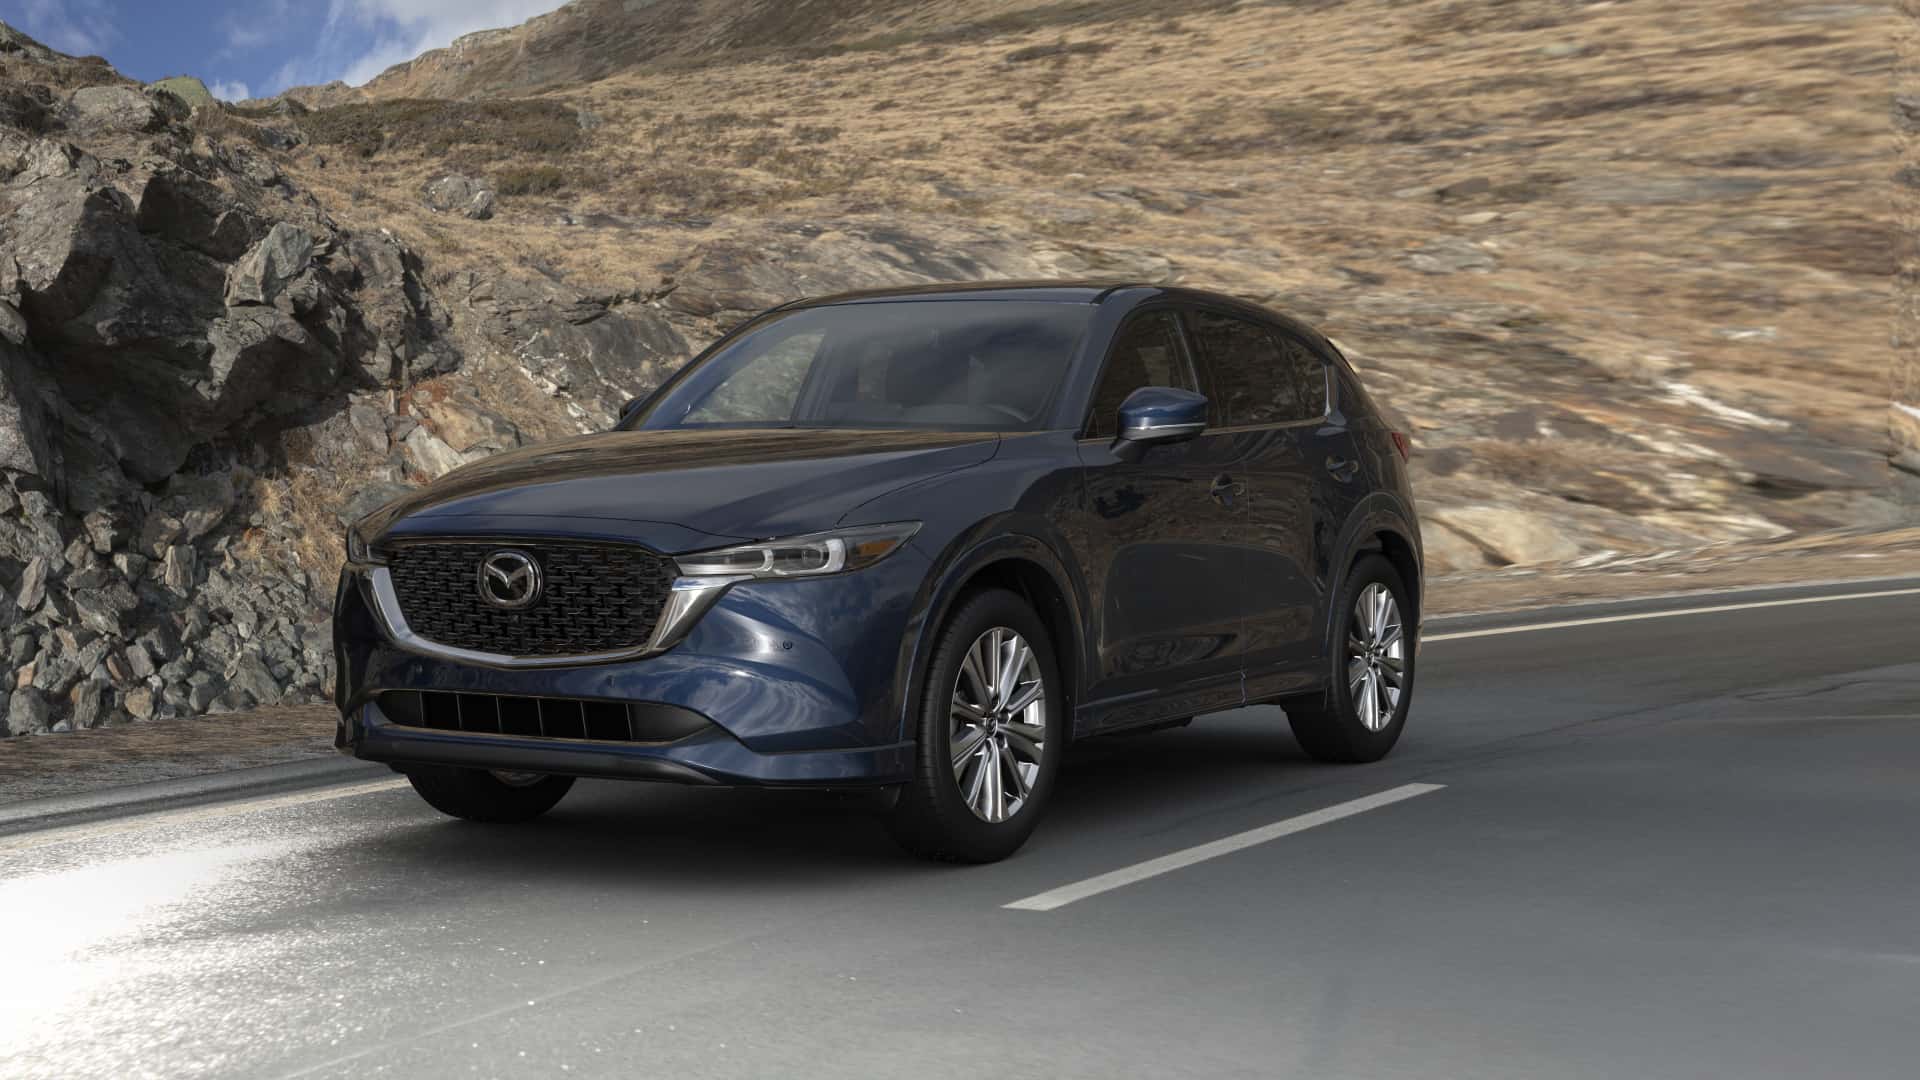 2023 Mazda CX-5 2.5 Turbo Signature Deep Crystal Blue Mica| Neil Huffman Mazda in Louisville KY